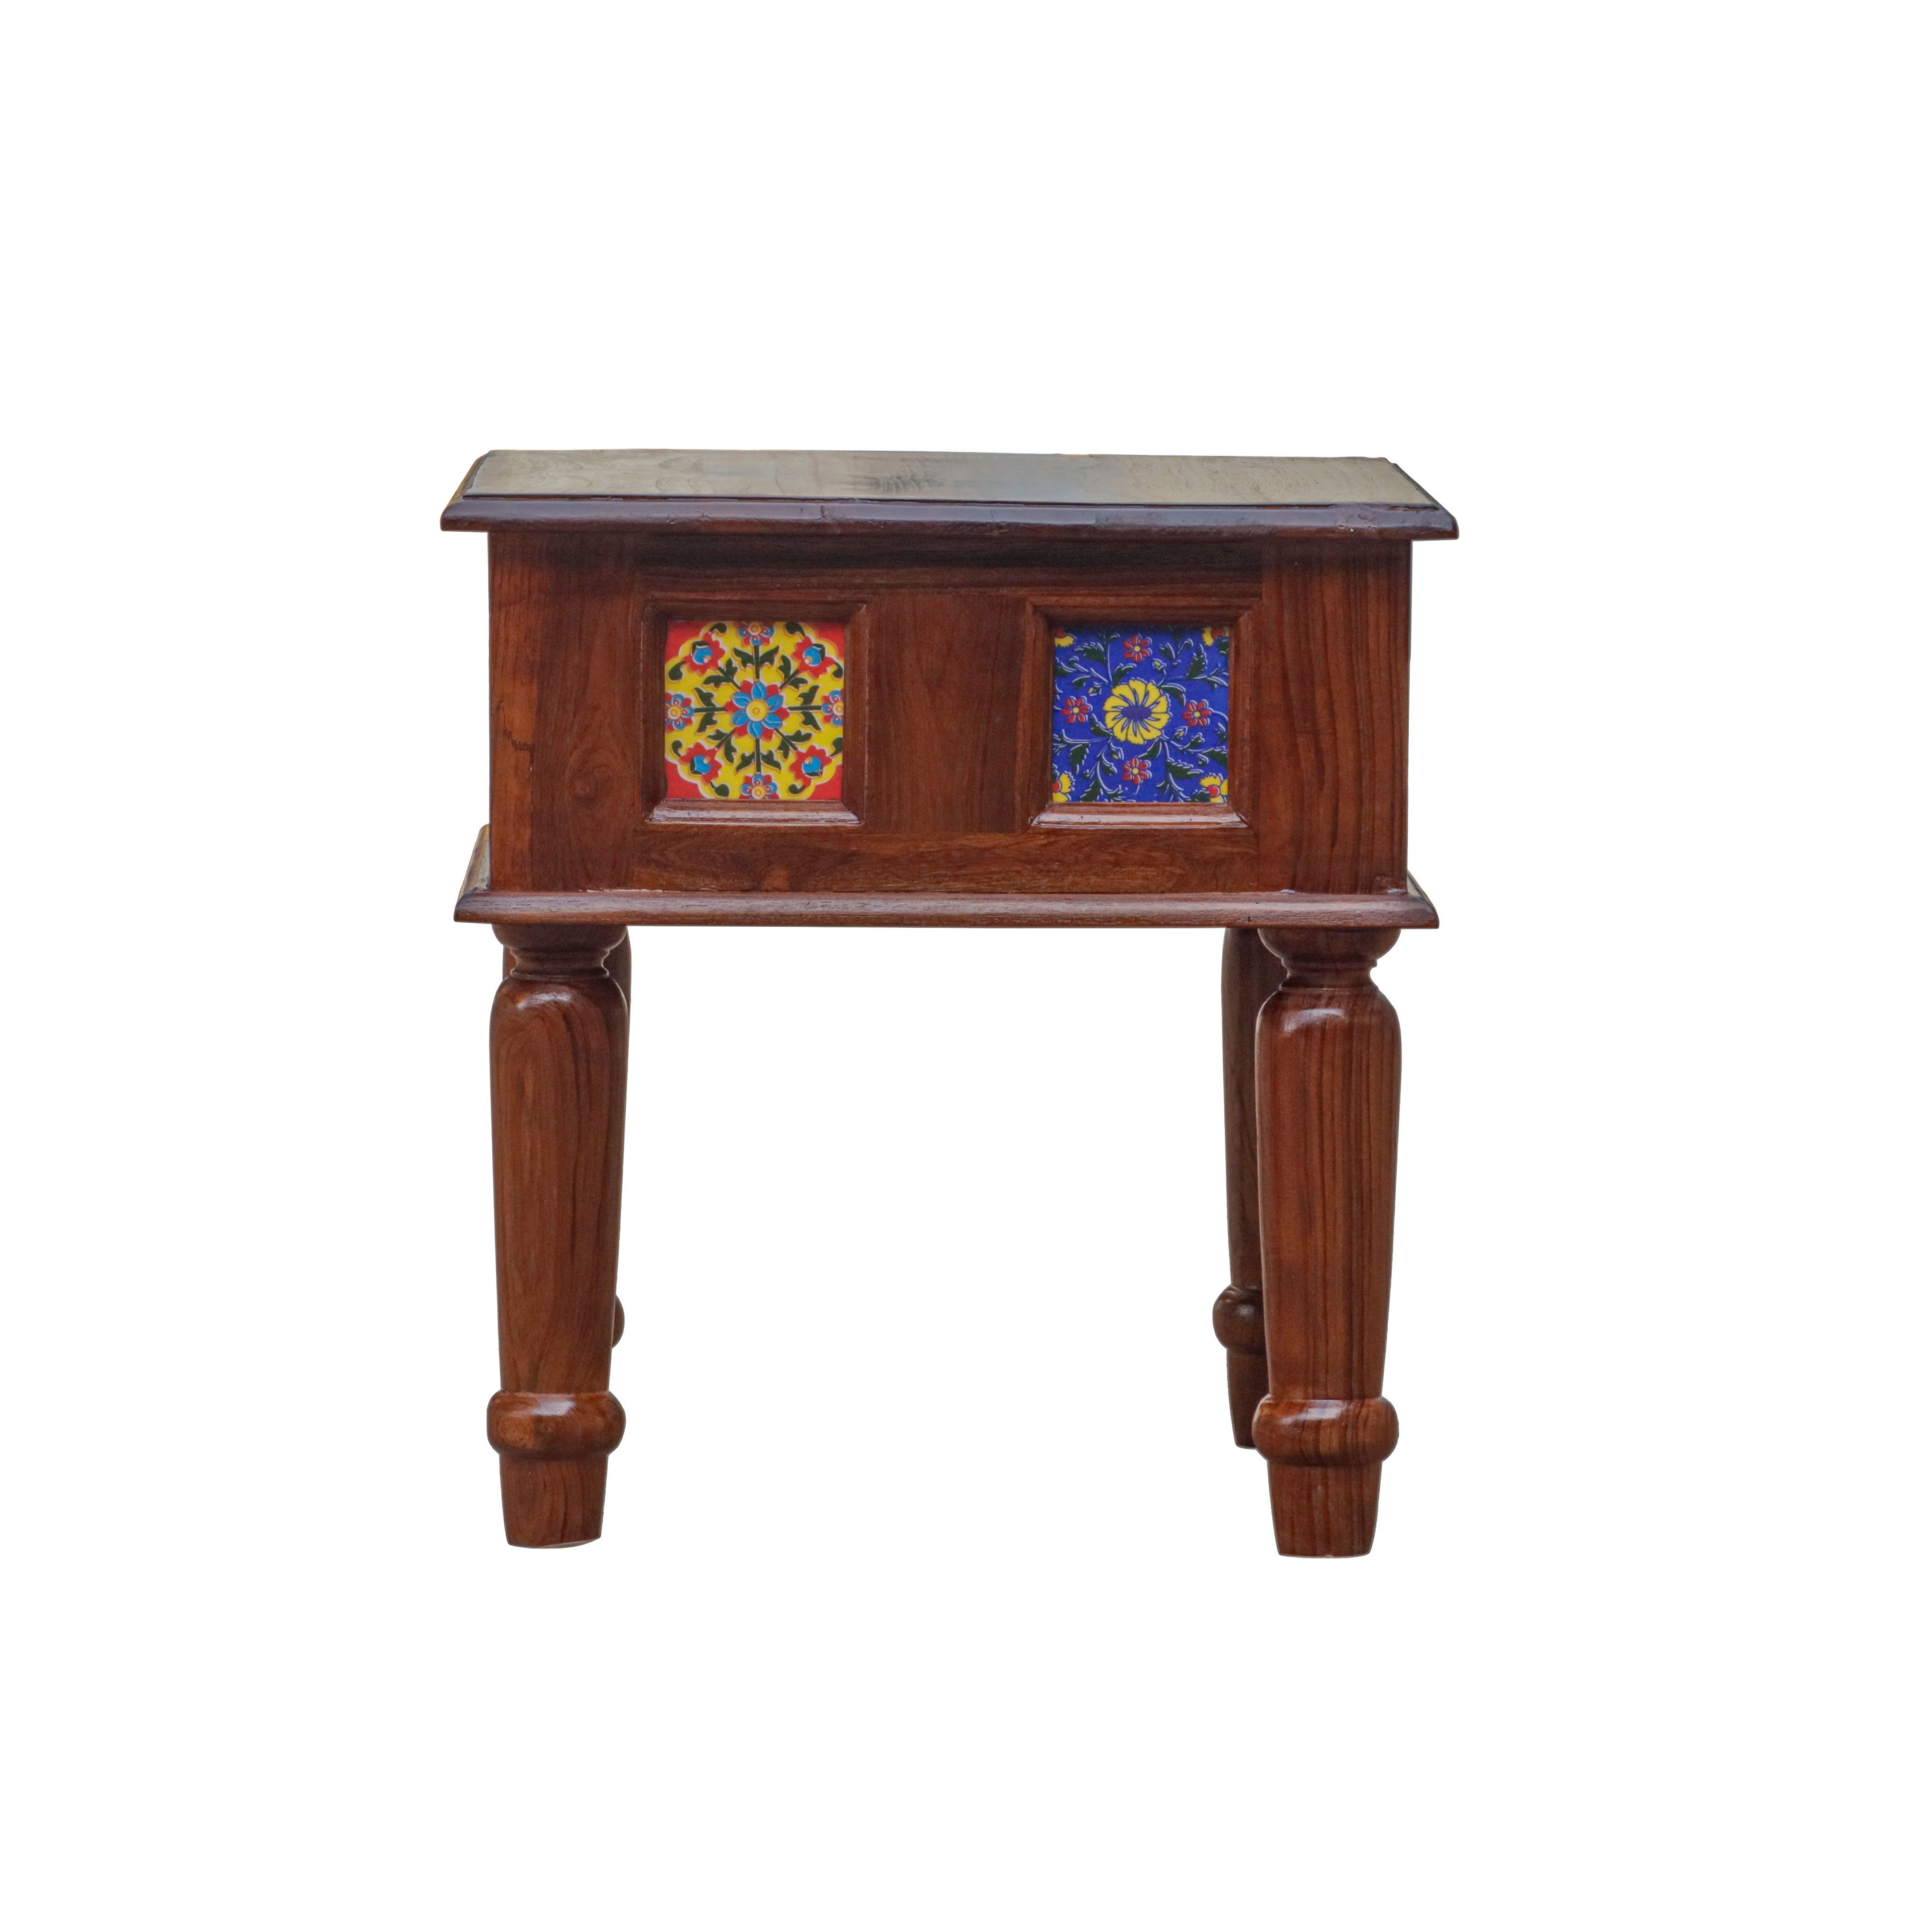 Aesthetic Round Leg Vintage Small Wooden Table with Tile (Single) Bedside